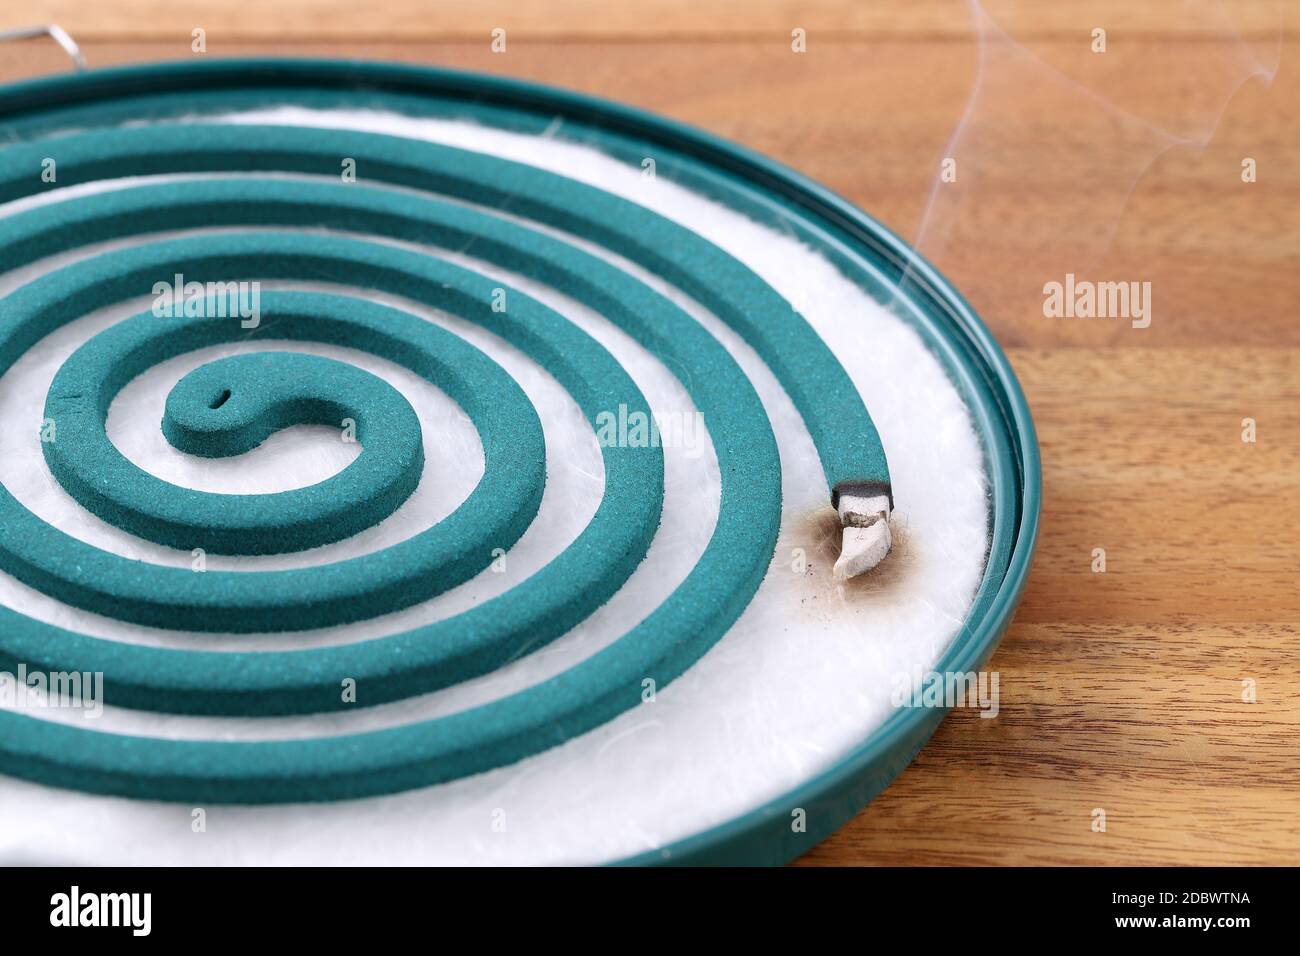 Classic green mosquito coil in a metal plate on table Stock Photo